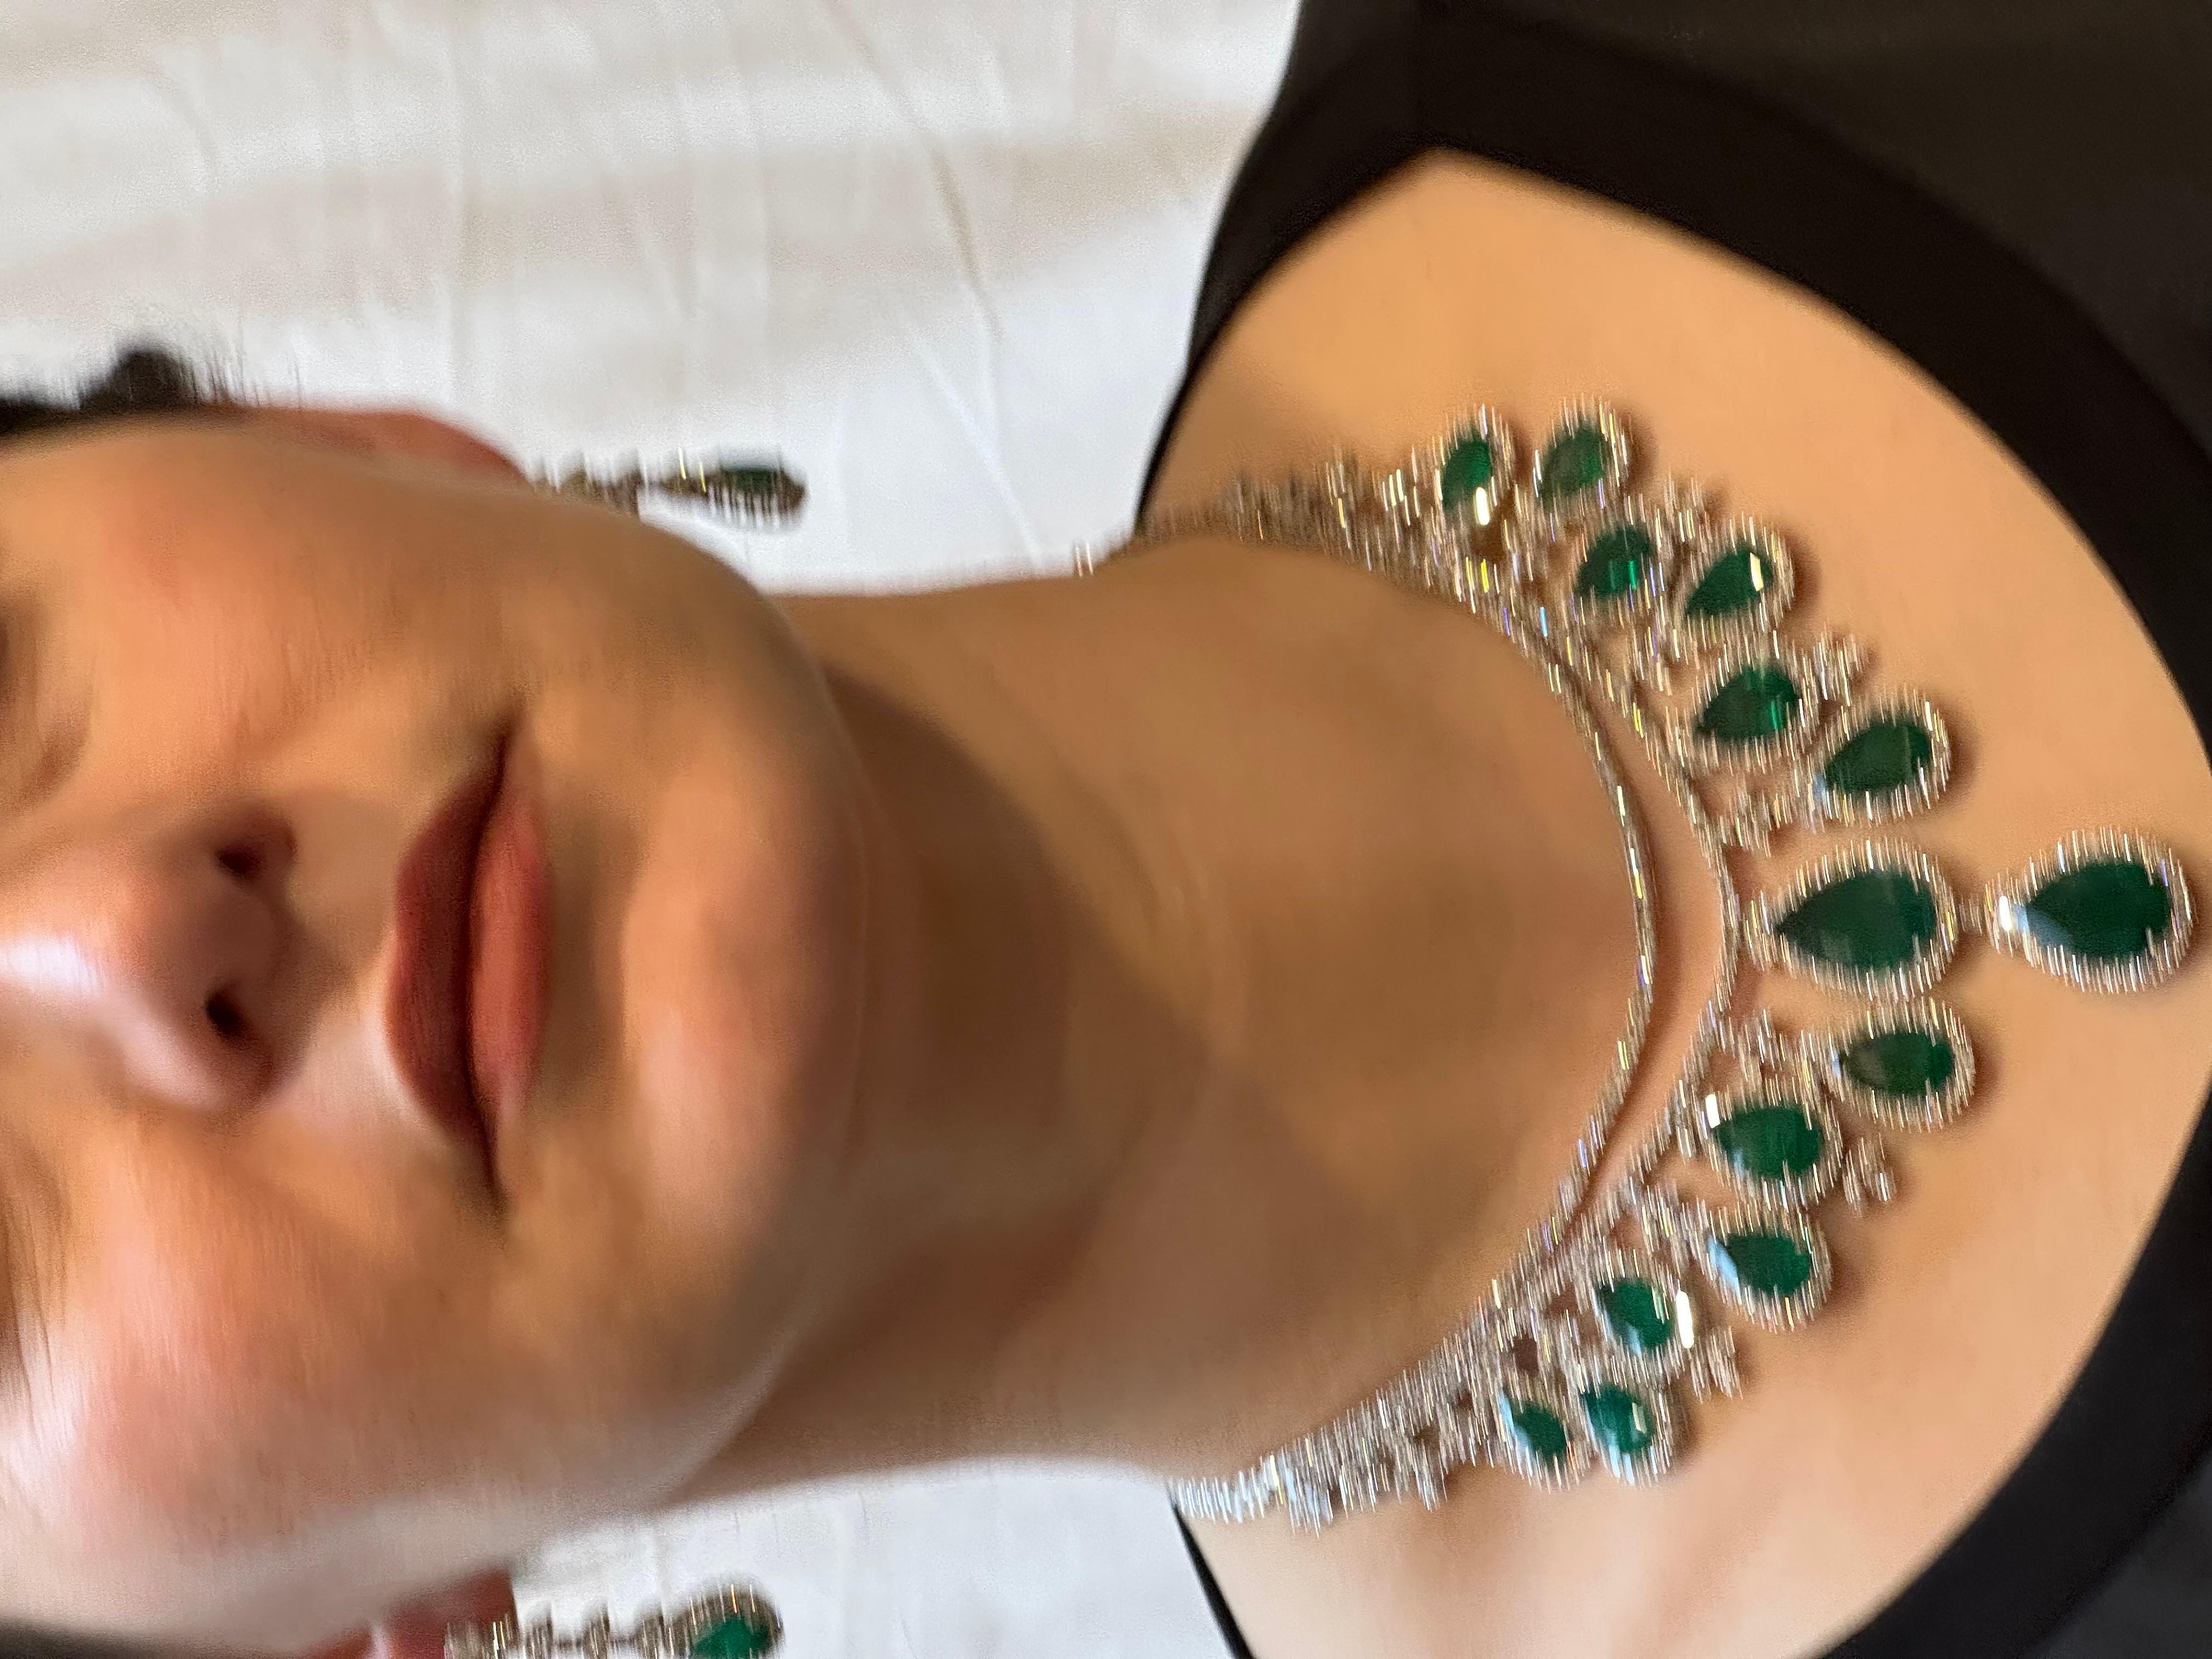 75 Ct Zambian Emerald and 30 Ct Diamond Necklace and Earring Bridal Suite For Sale 13